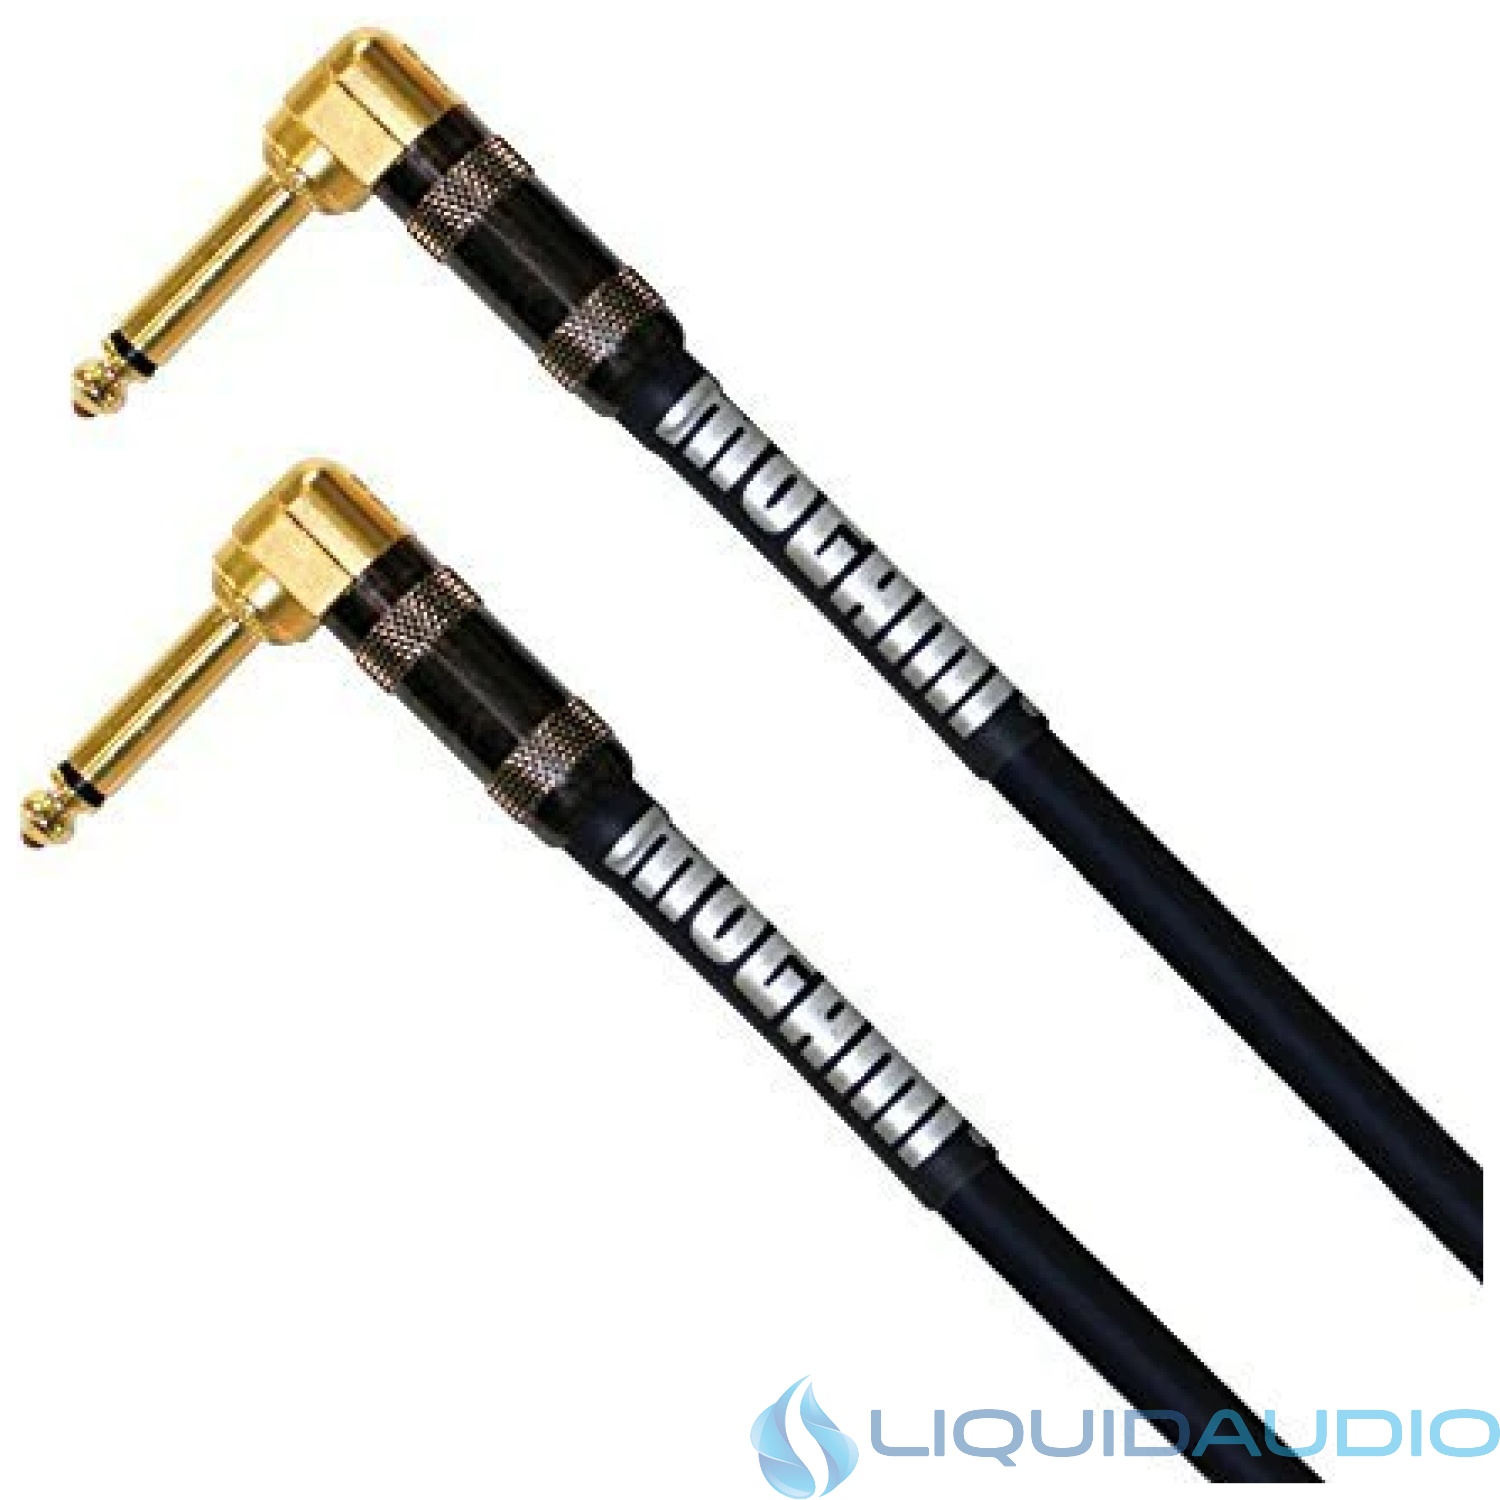 Mogami PLATINUM GUITAR-03RR Pedal/Effects Instrument Cable, Gold 1/4" TS Right Angle Plugs, 3 ft.